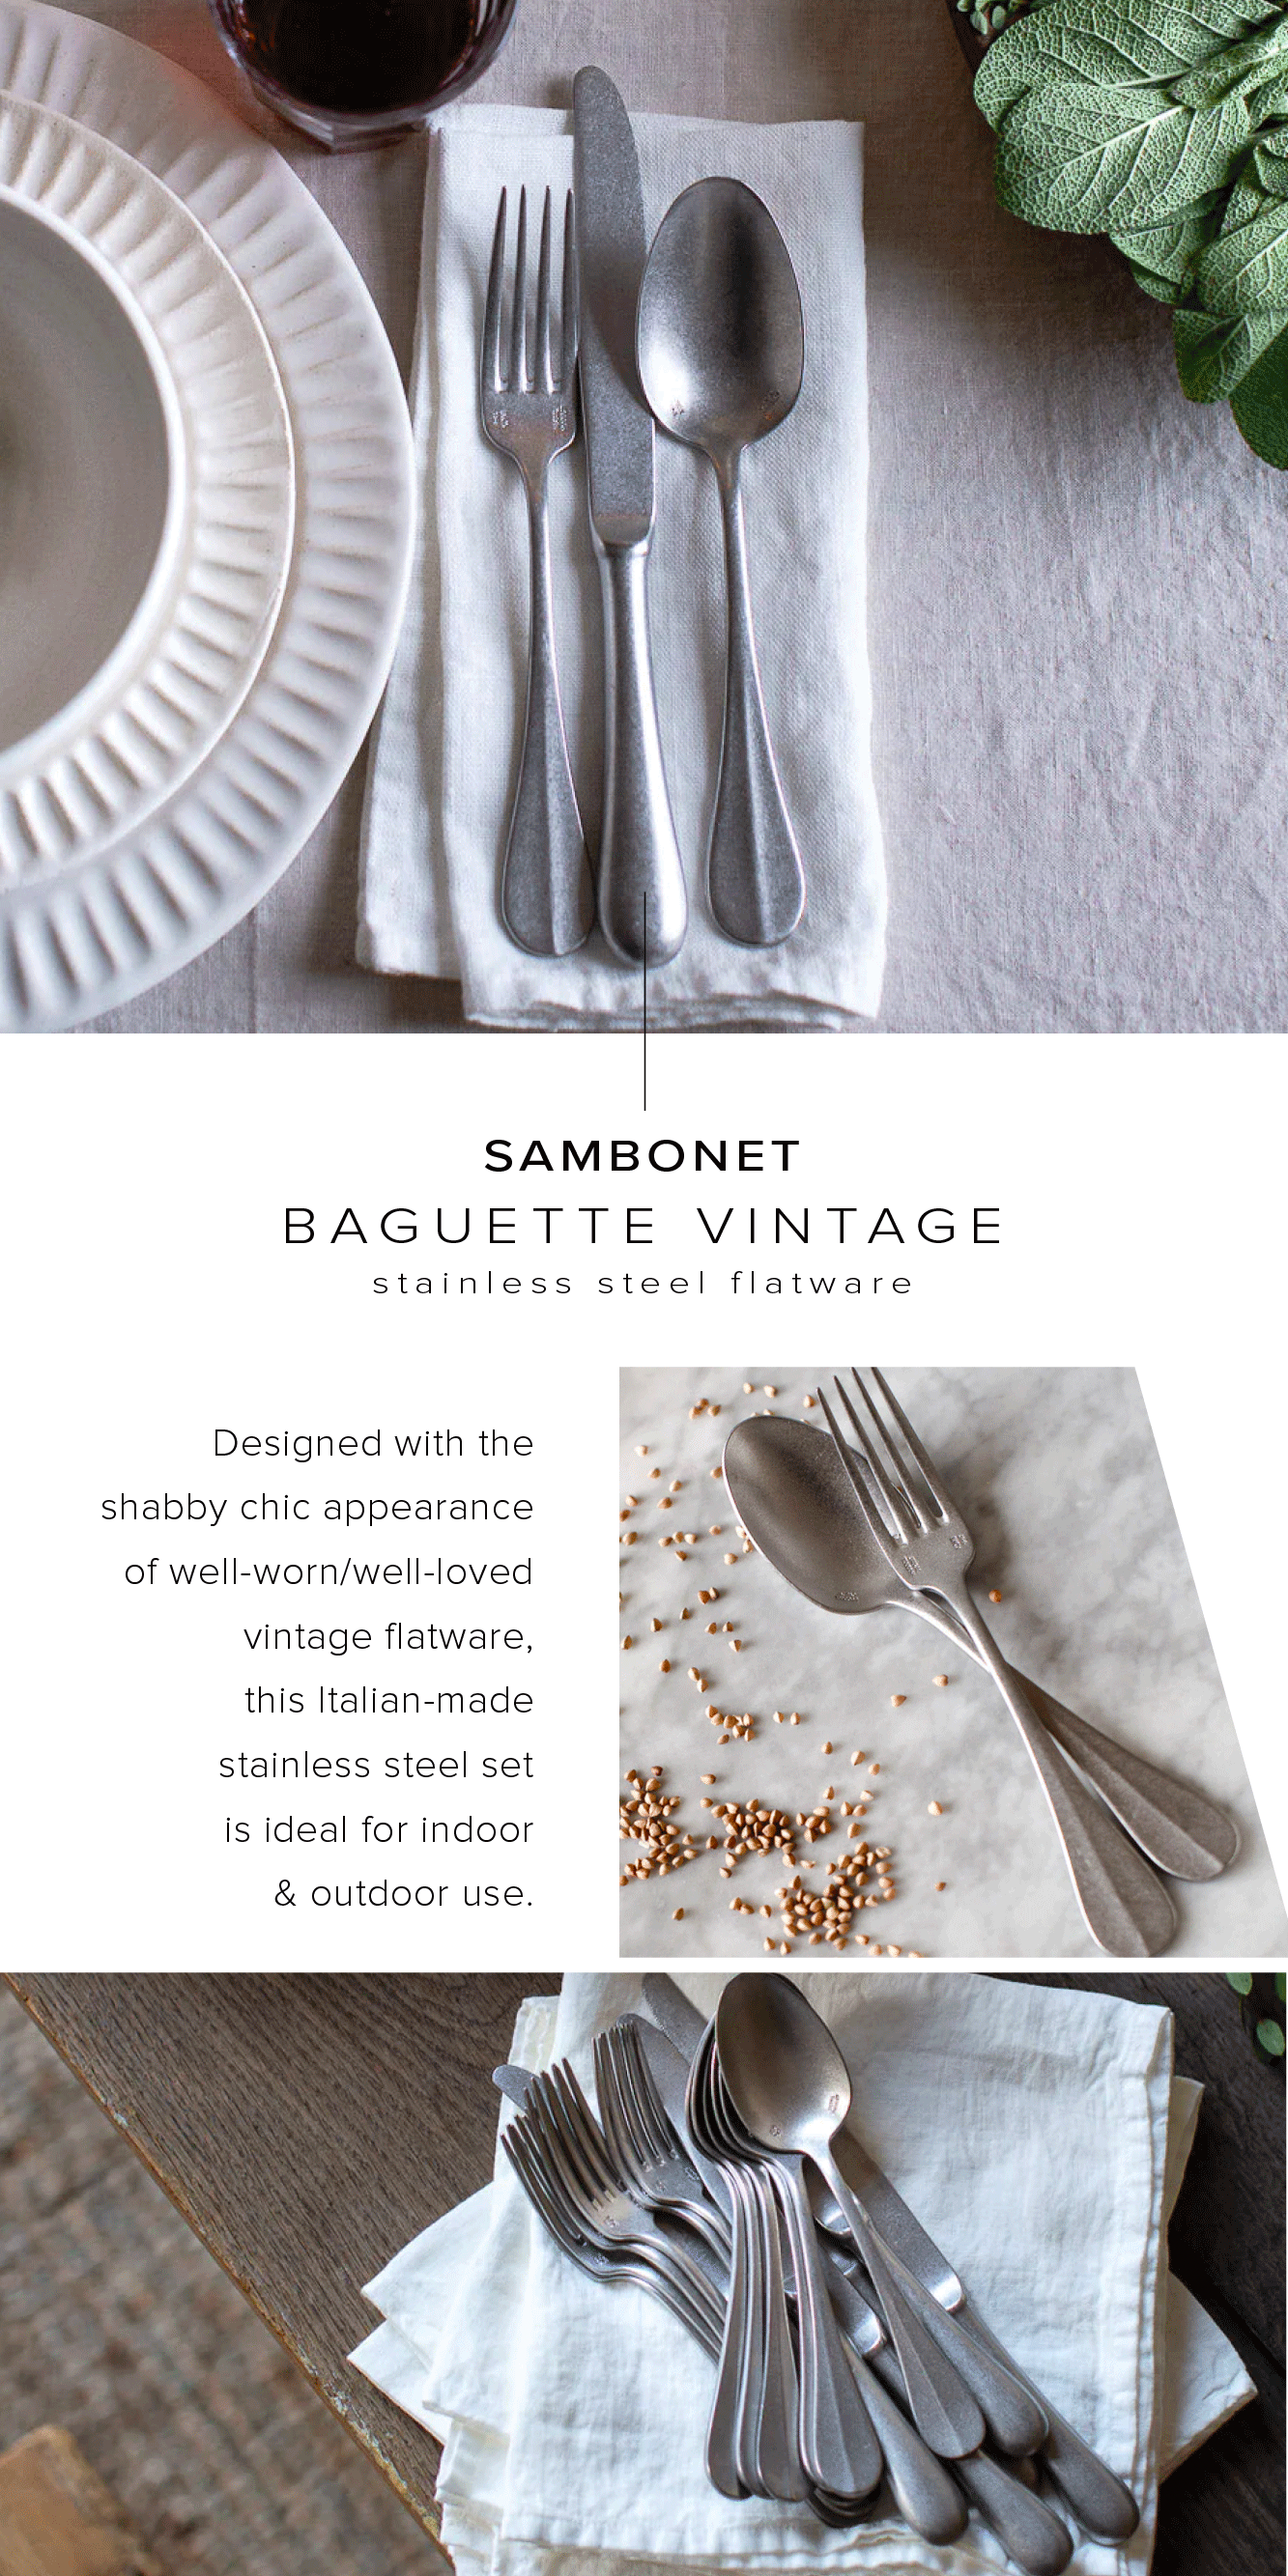  SAMBONET BAGUETTE VINTAGE stainless steel flatware Designed with the shabby chic appearance of well-wornwell-loved vintage flatware, this Italian-made stainless steel set is ideal for indoor outdoor use. 